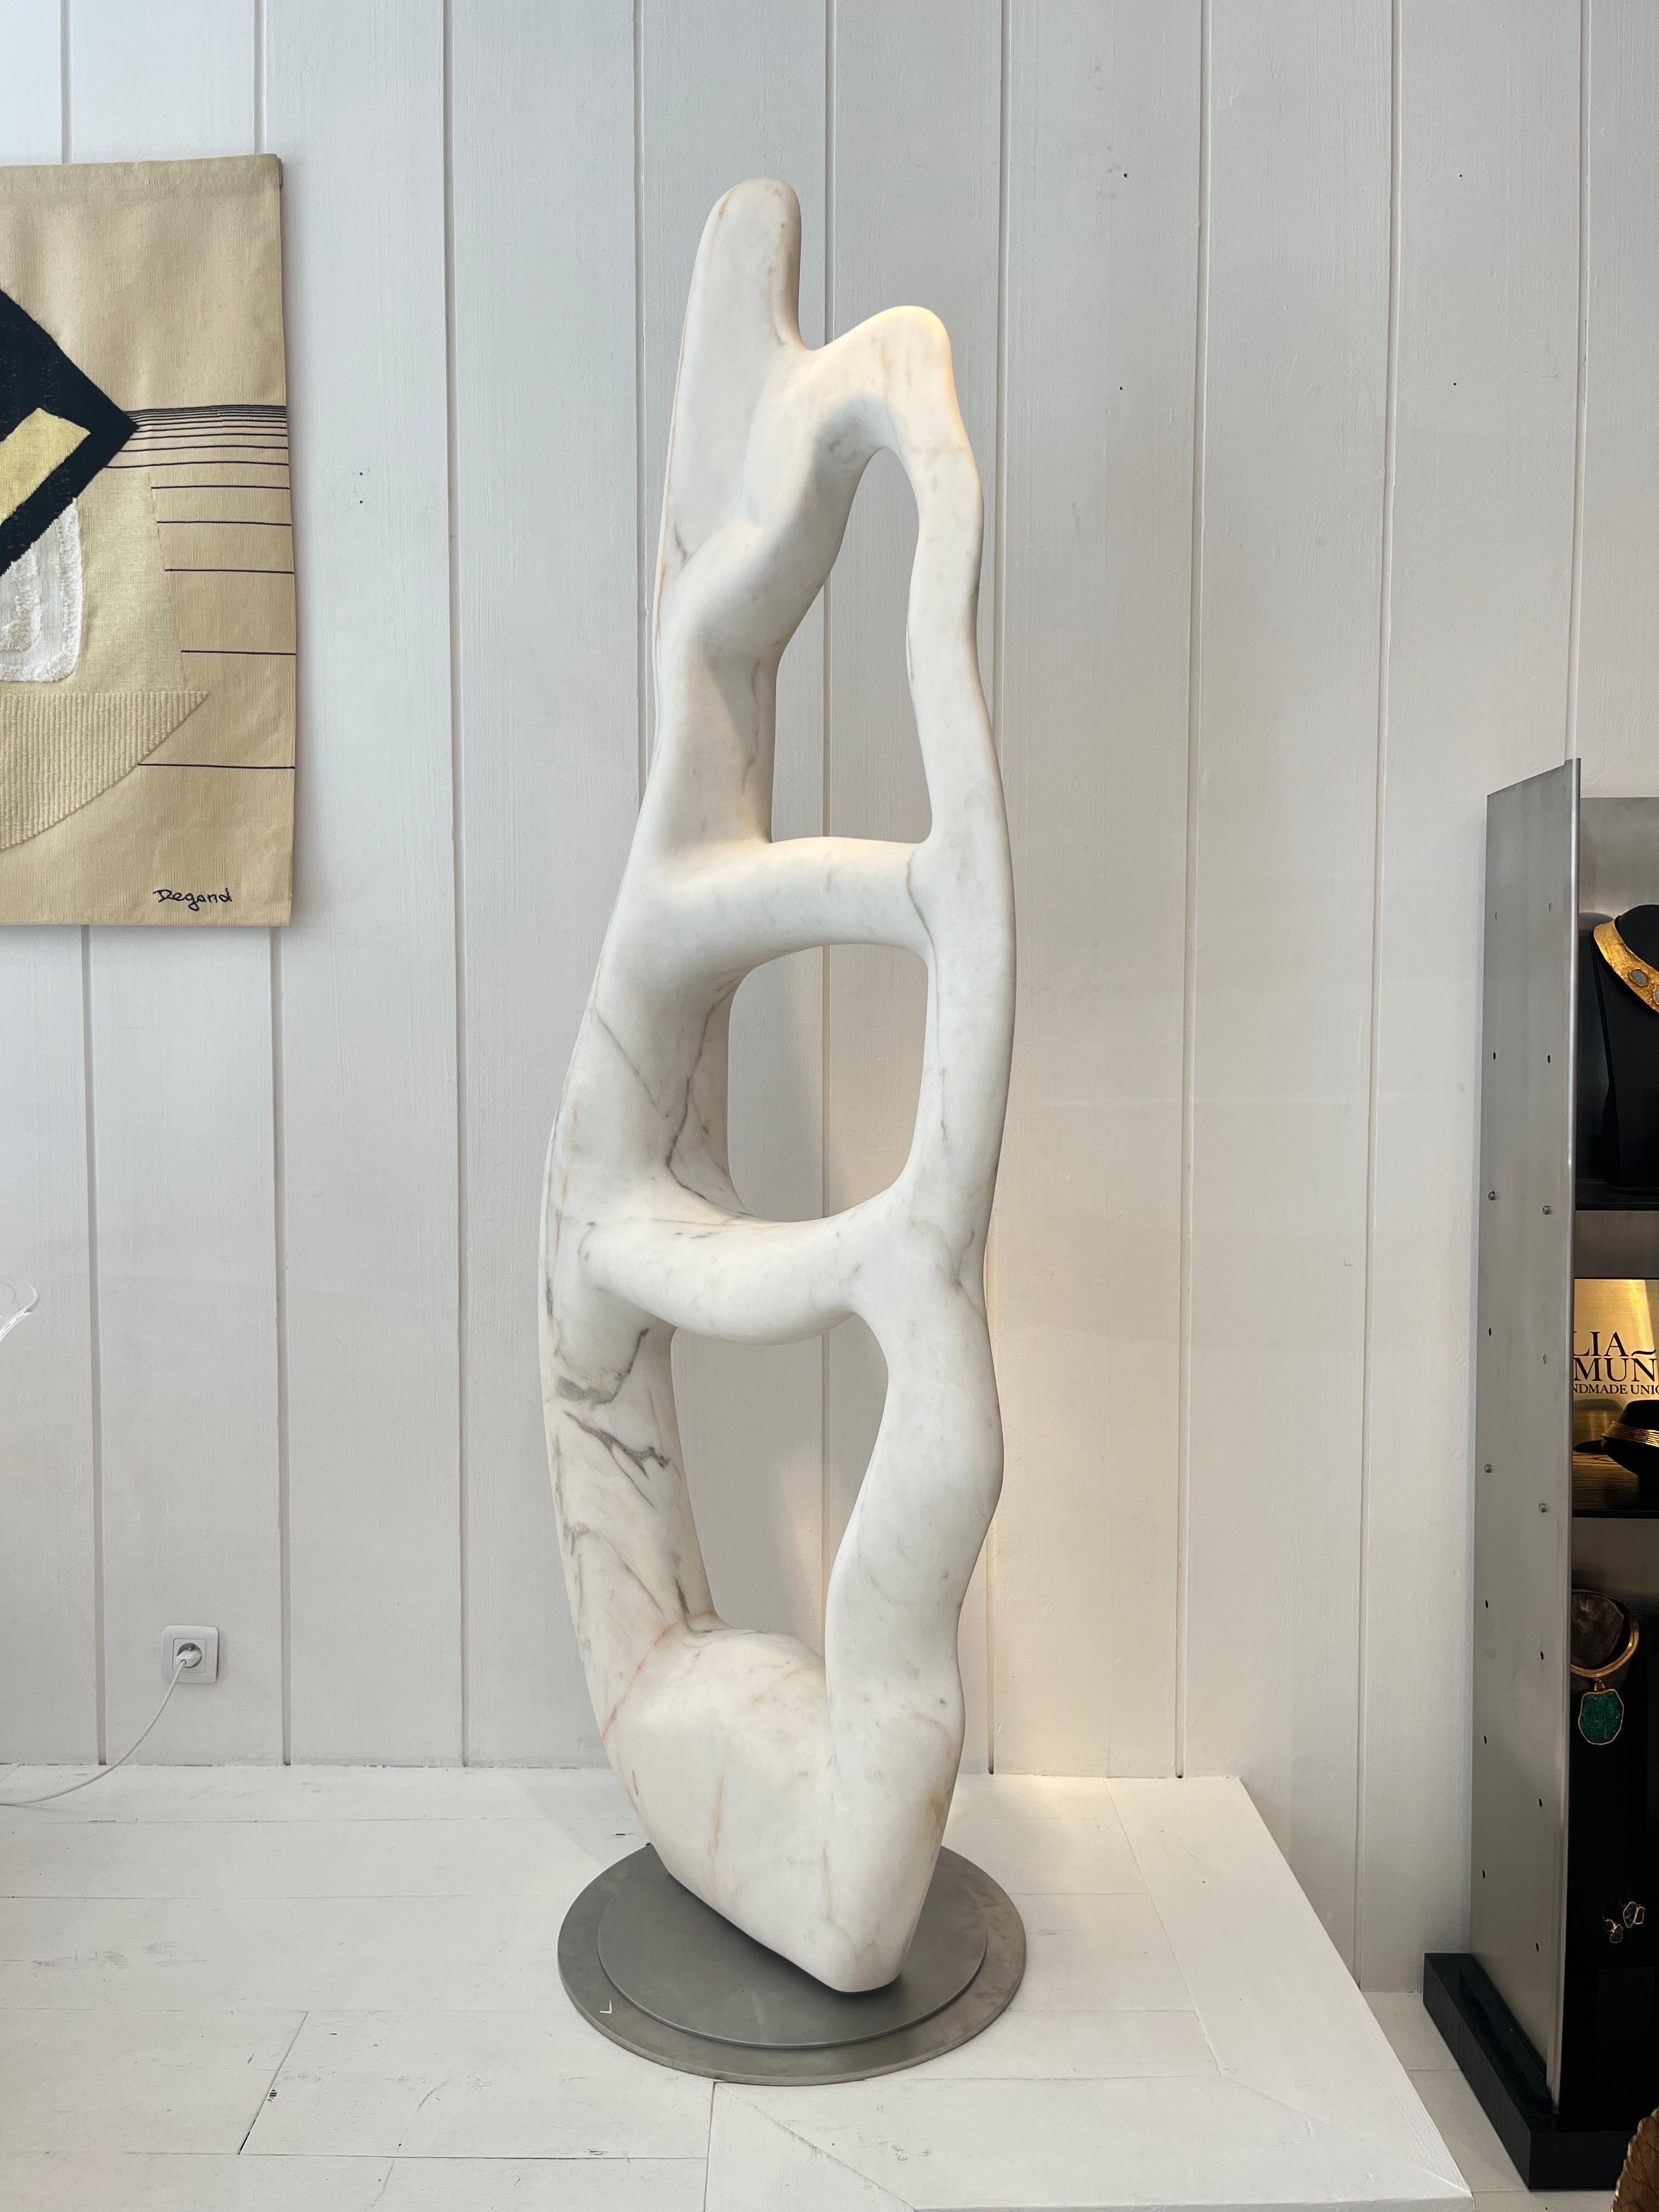 Jean-Frédéric Bourdier, monumental white marble sculpture 
the sculpture rotates 360 degres on the stazinlees steel base
Estremoz marble
Perfect  to  be places outside.
Signed by the artist
Width: 82 cm Height: 220 cm Diameter: 57 cm.